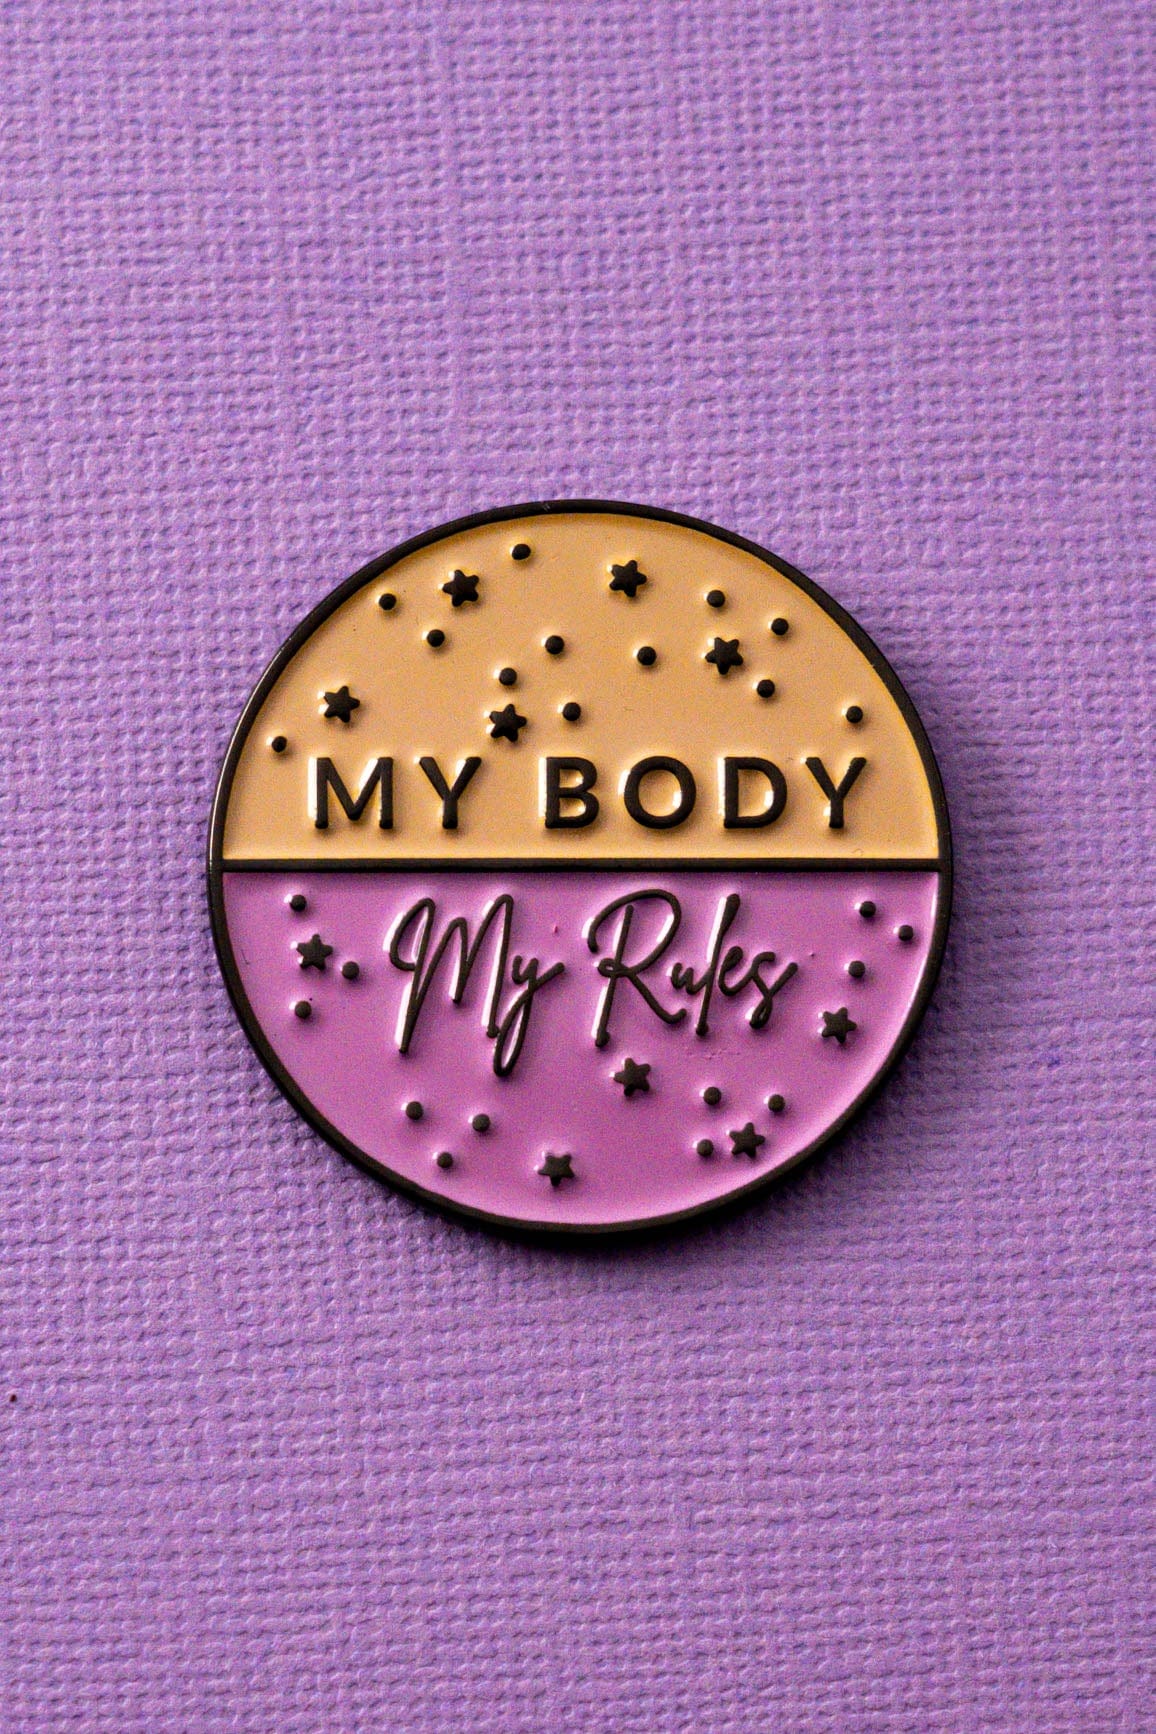 Pin on to better my body